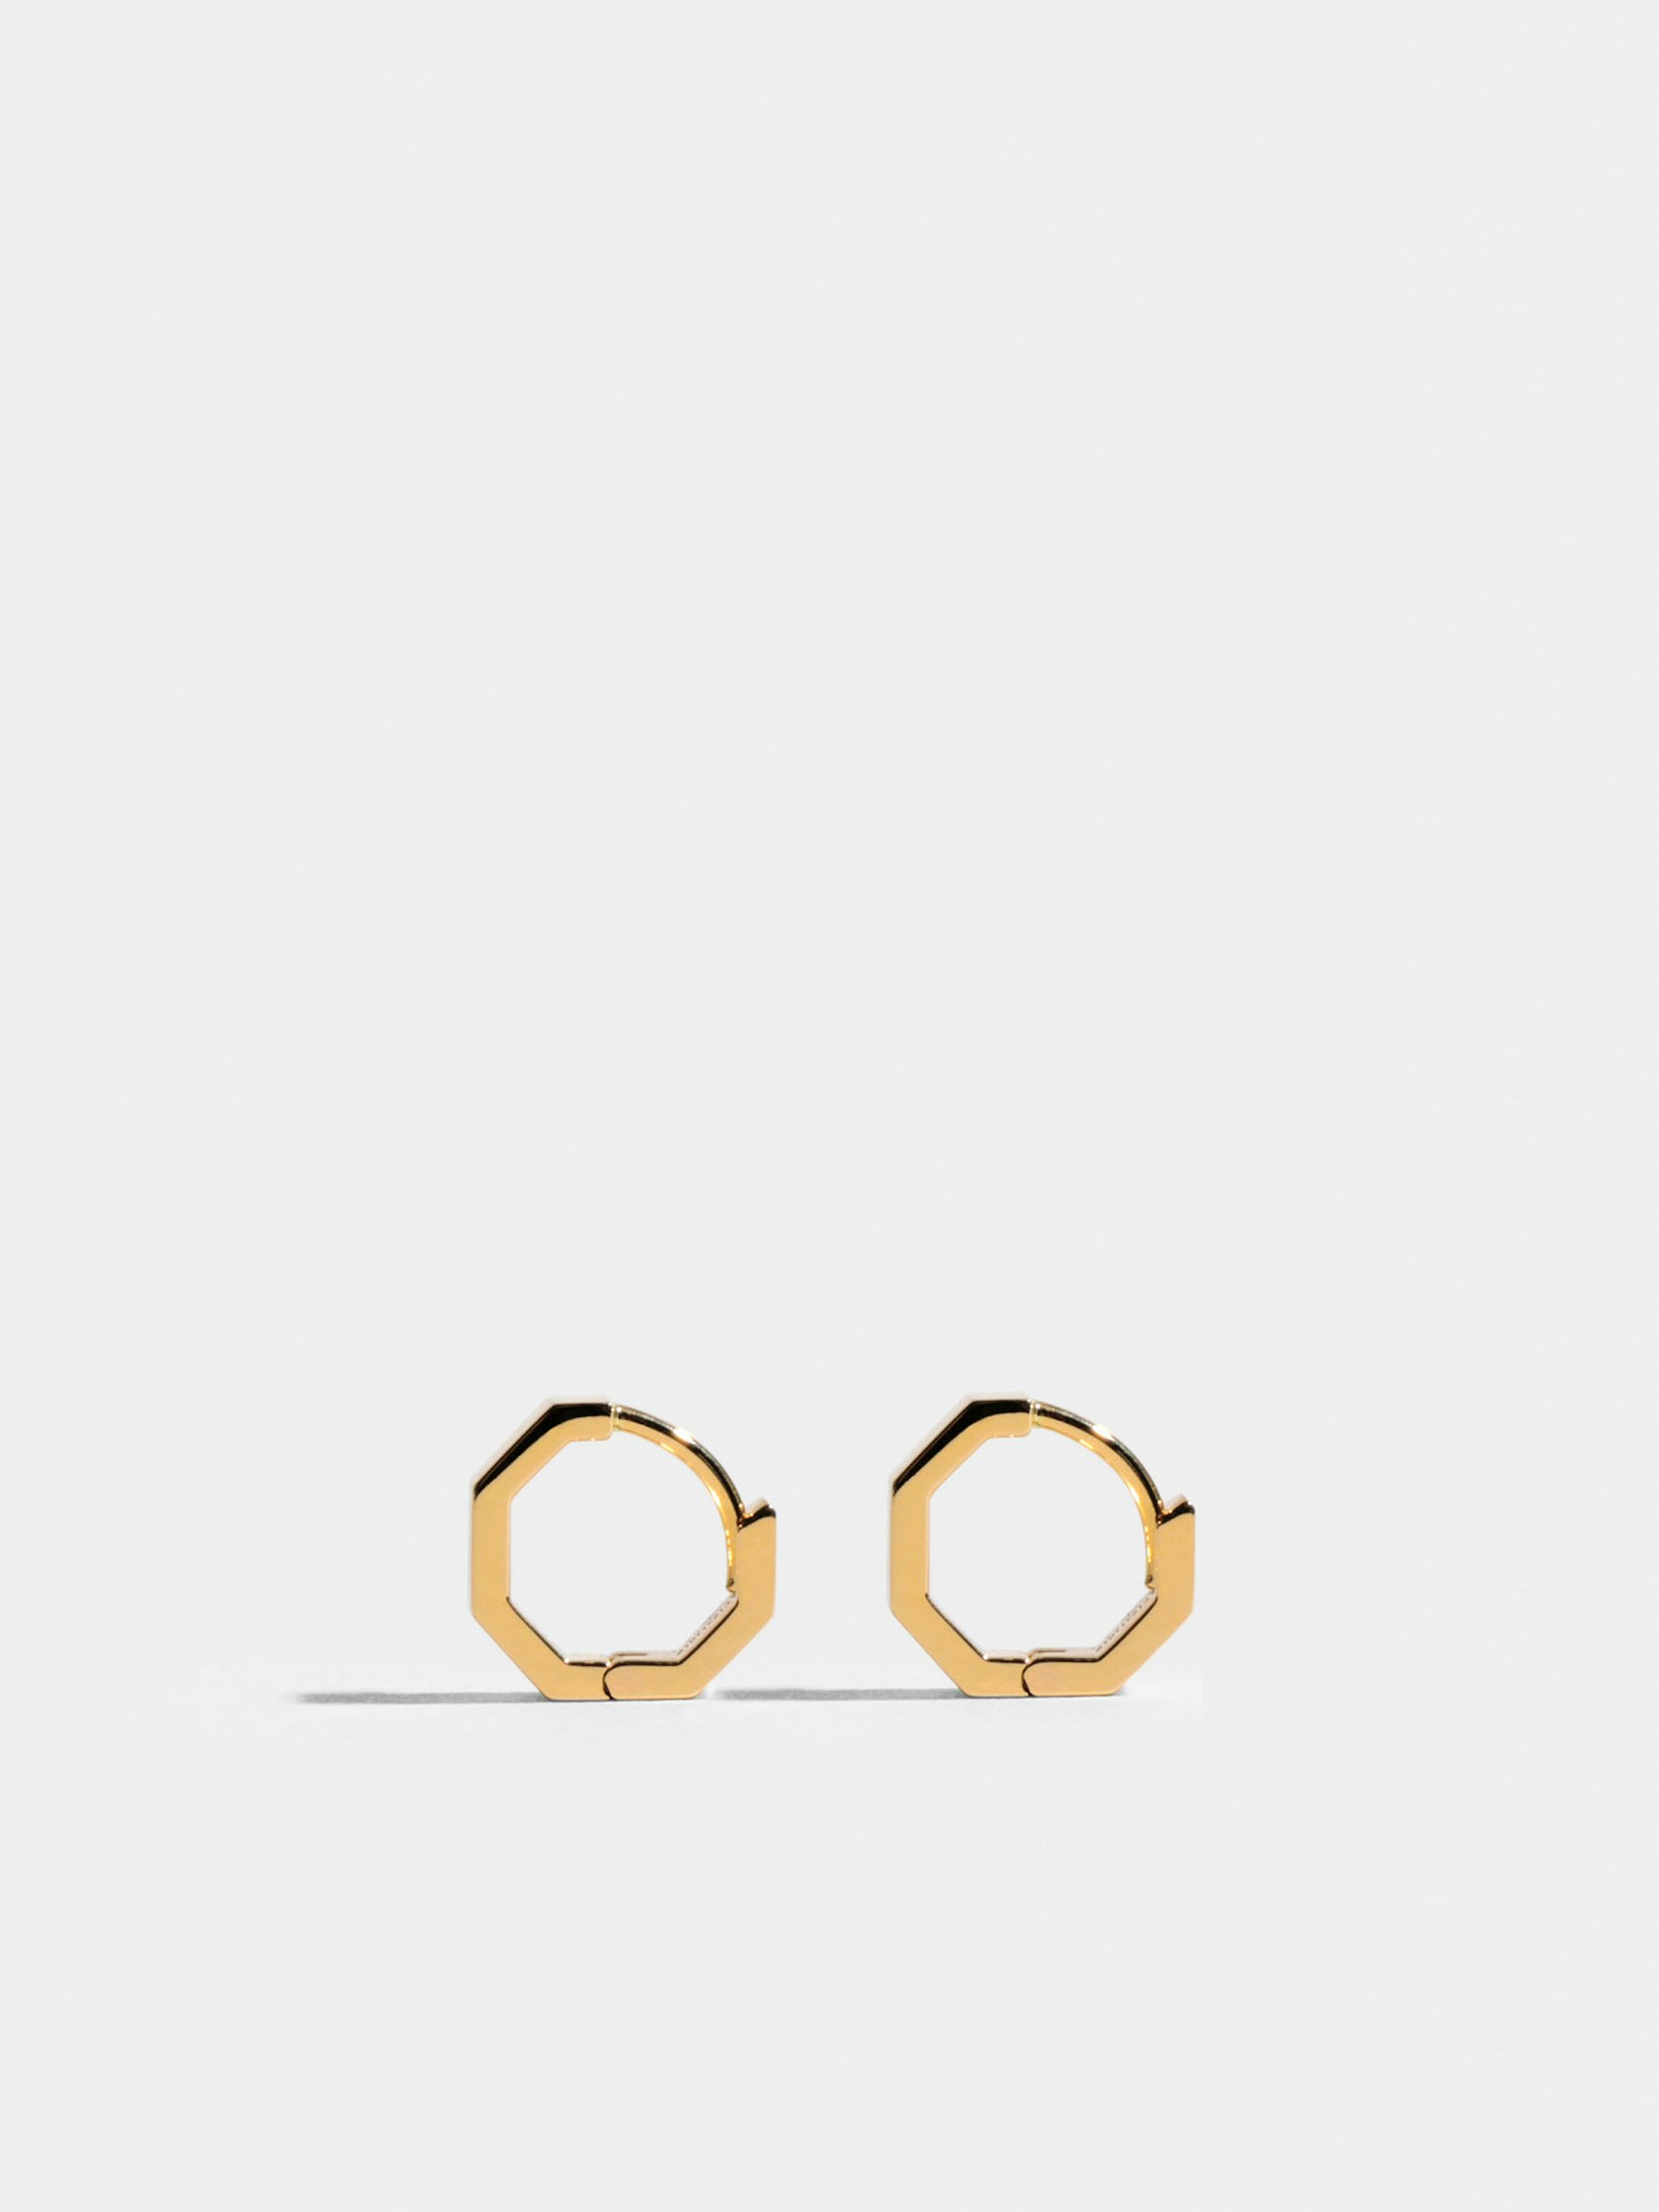 Octogone 10mm earrings in 18k Fairmined ethical yellow gold, paved with lab-grown diamonds, the pair.